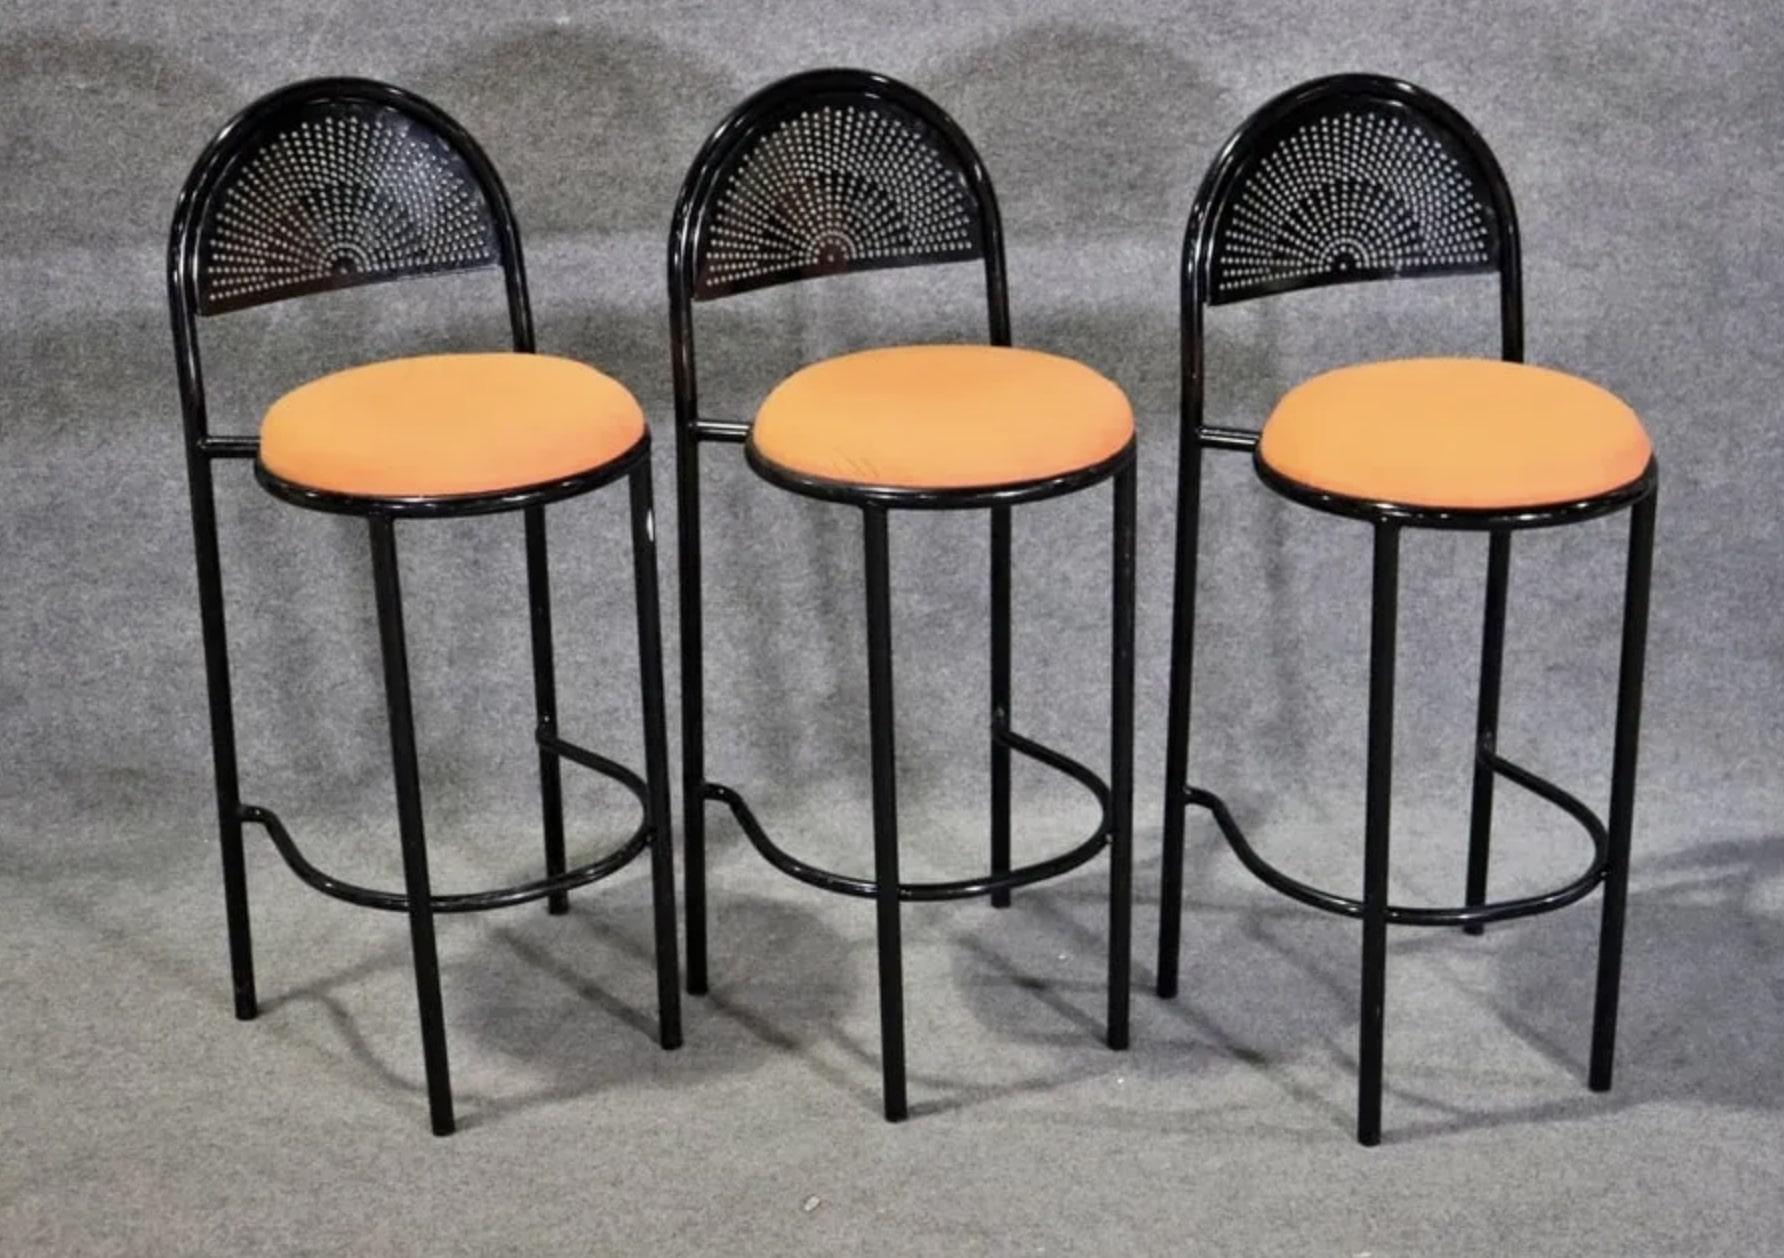 6 Available
Listing is for 3 black painted metal stools with bright orange seats.
Half round perforated seat back.
Please confirm location NY or NJ